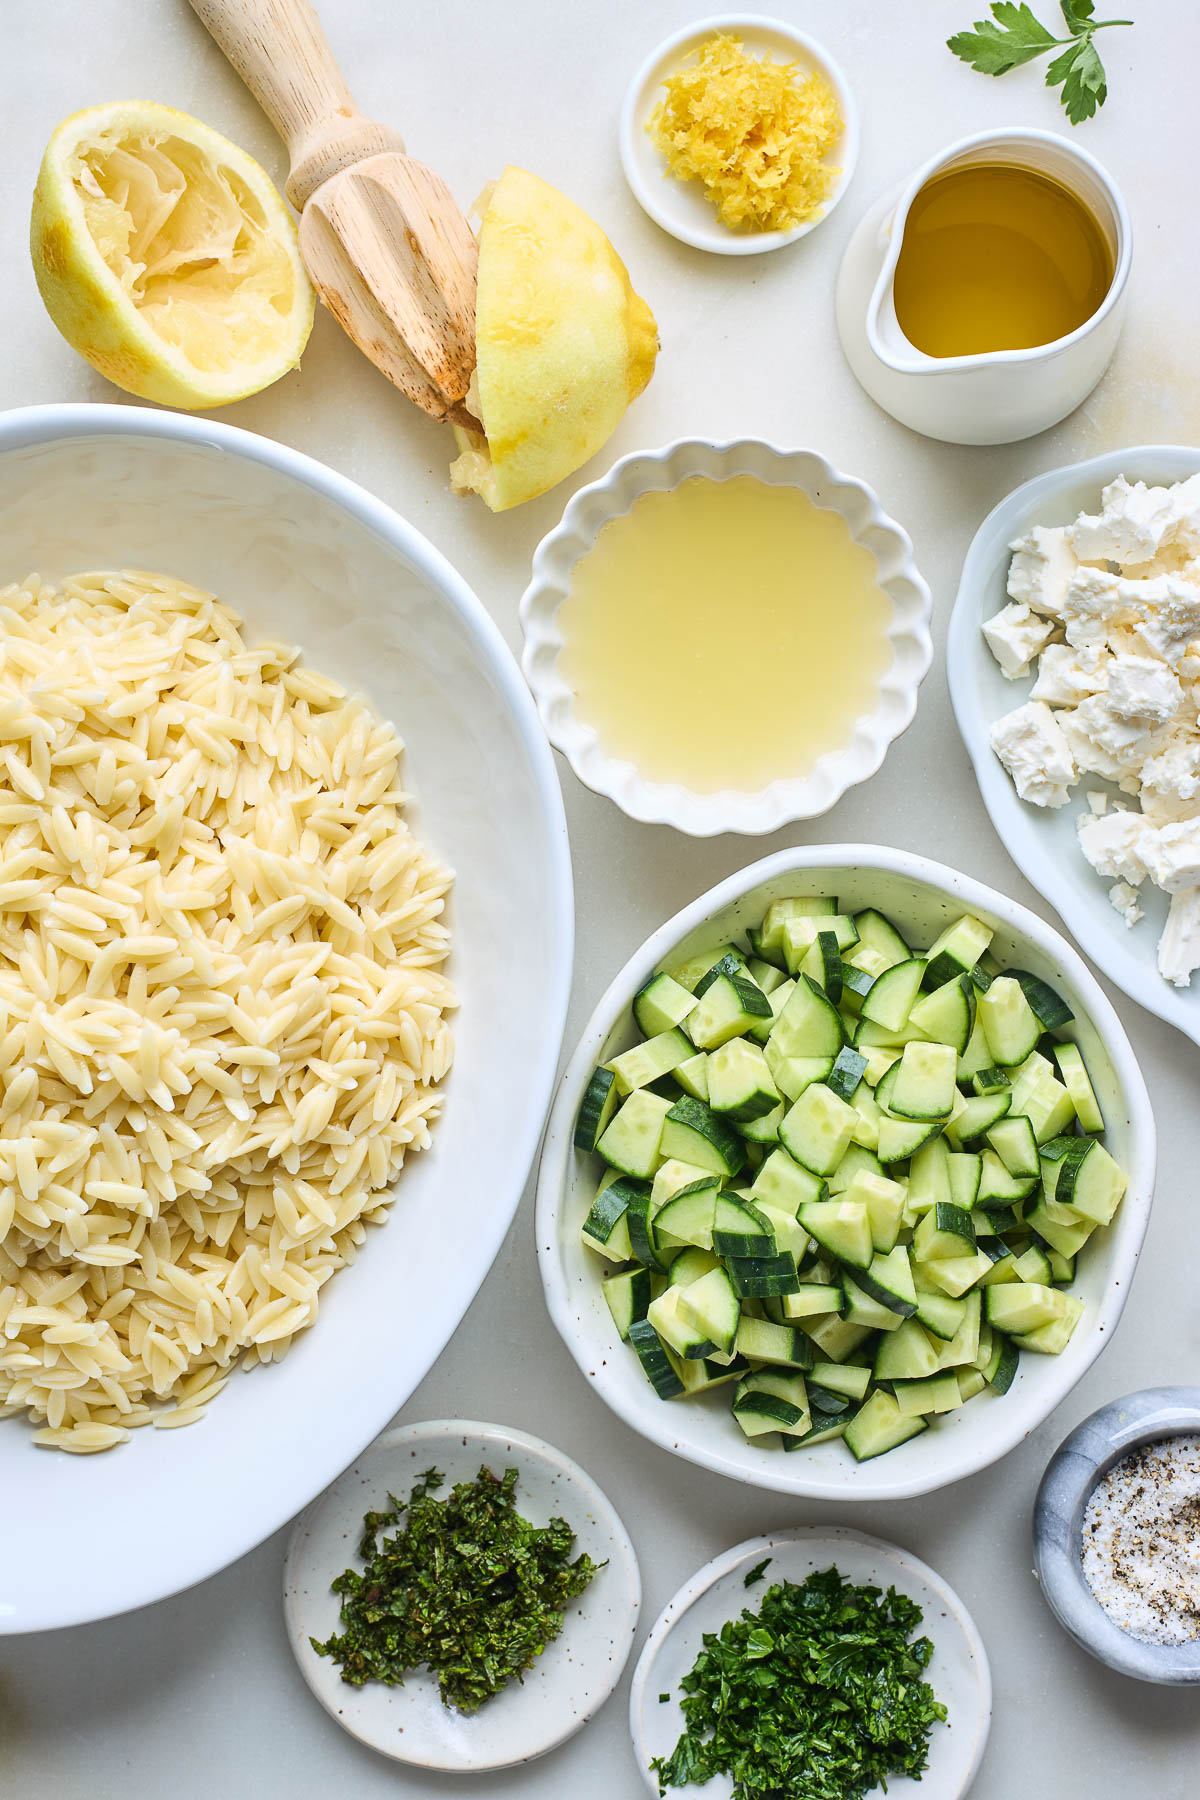 Ingredients to make a summer orzo pasta salad.